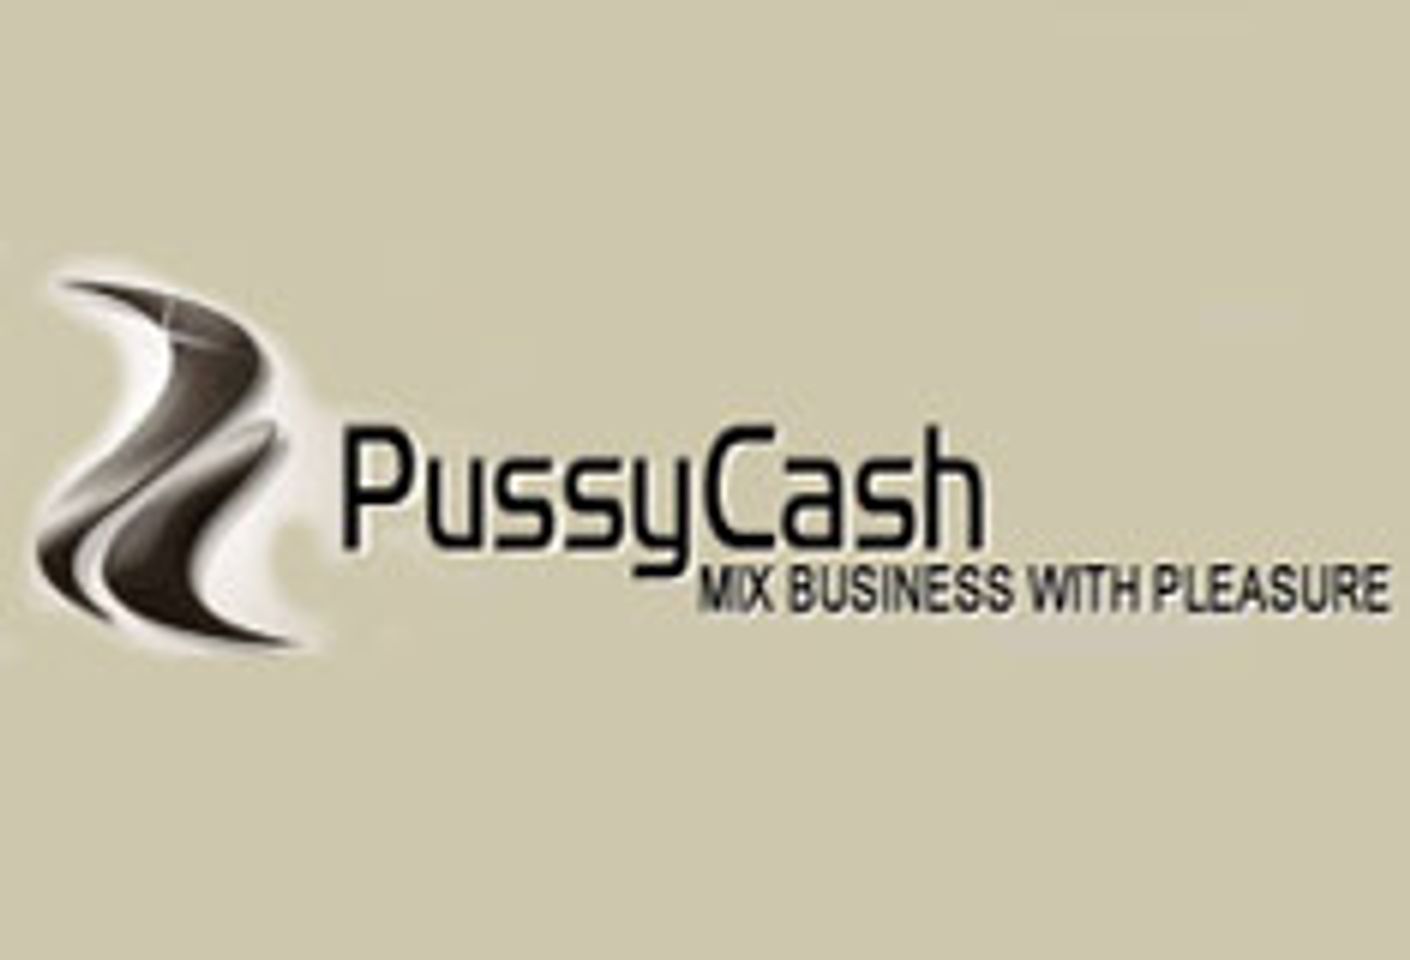 PussyCash Paying $100 for IMLive Sign-ups